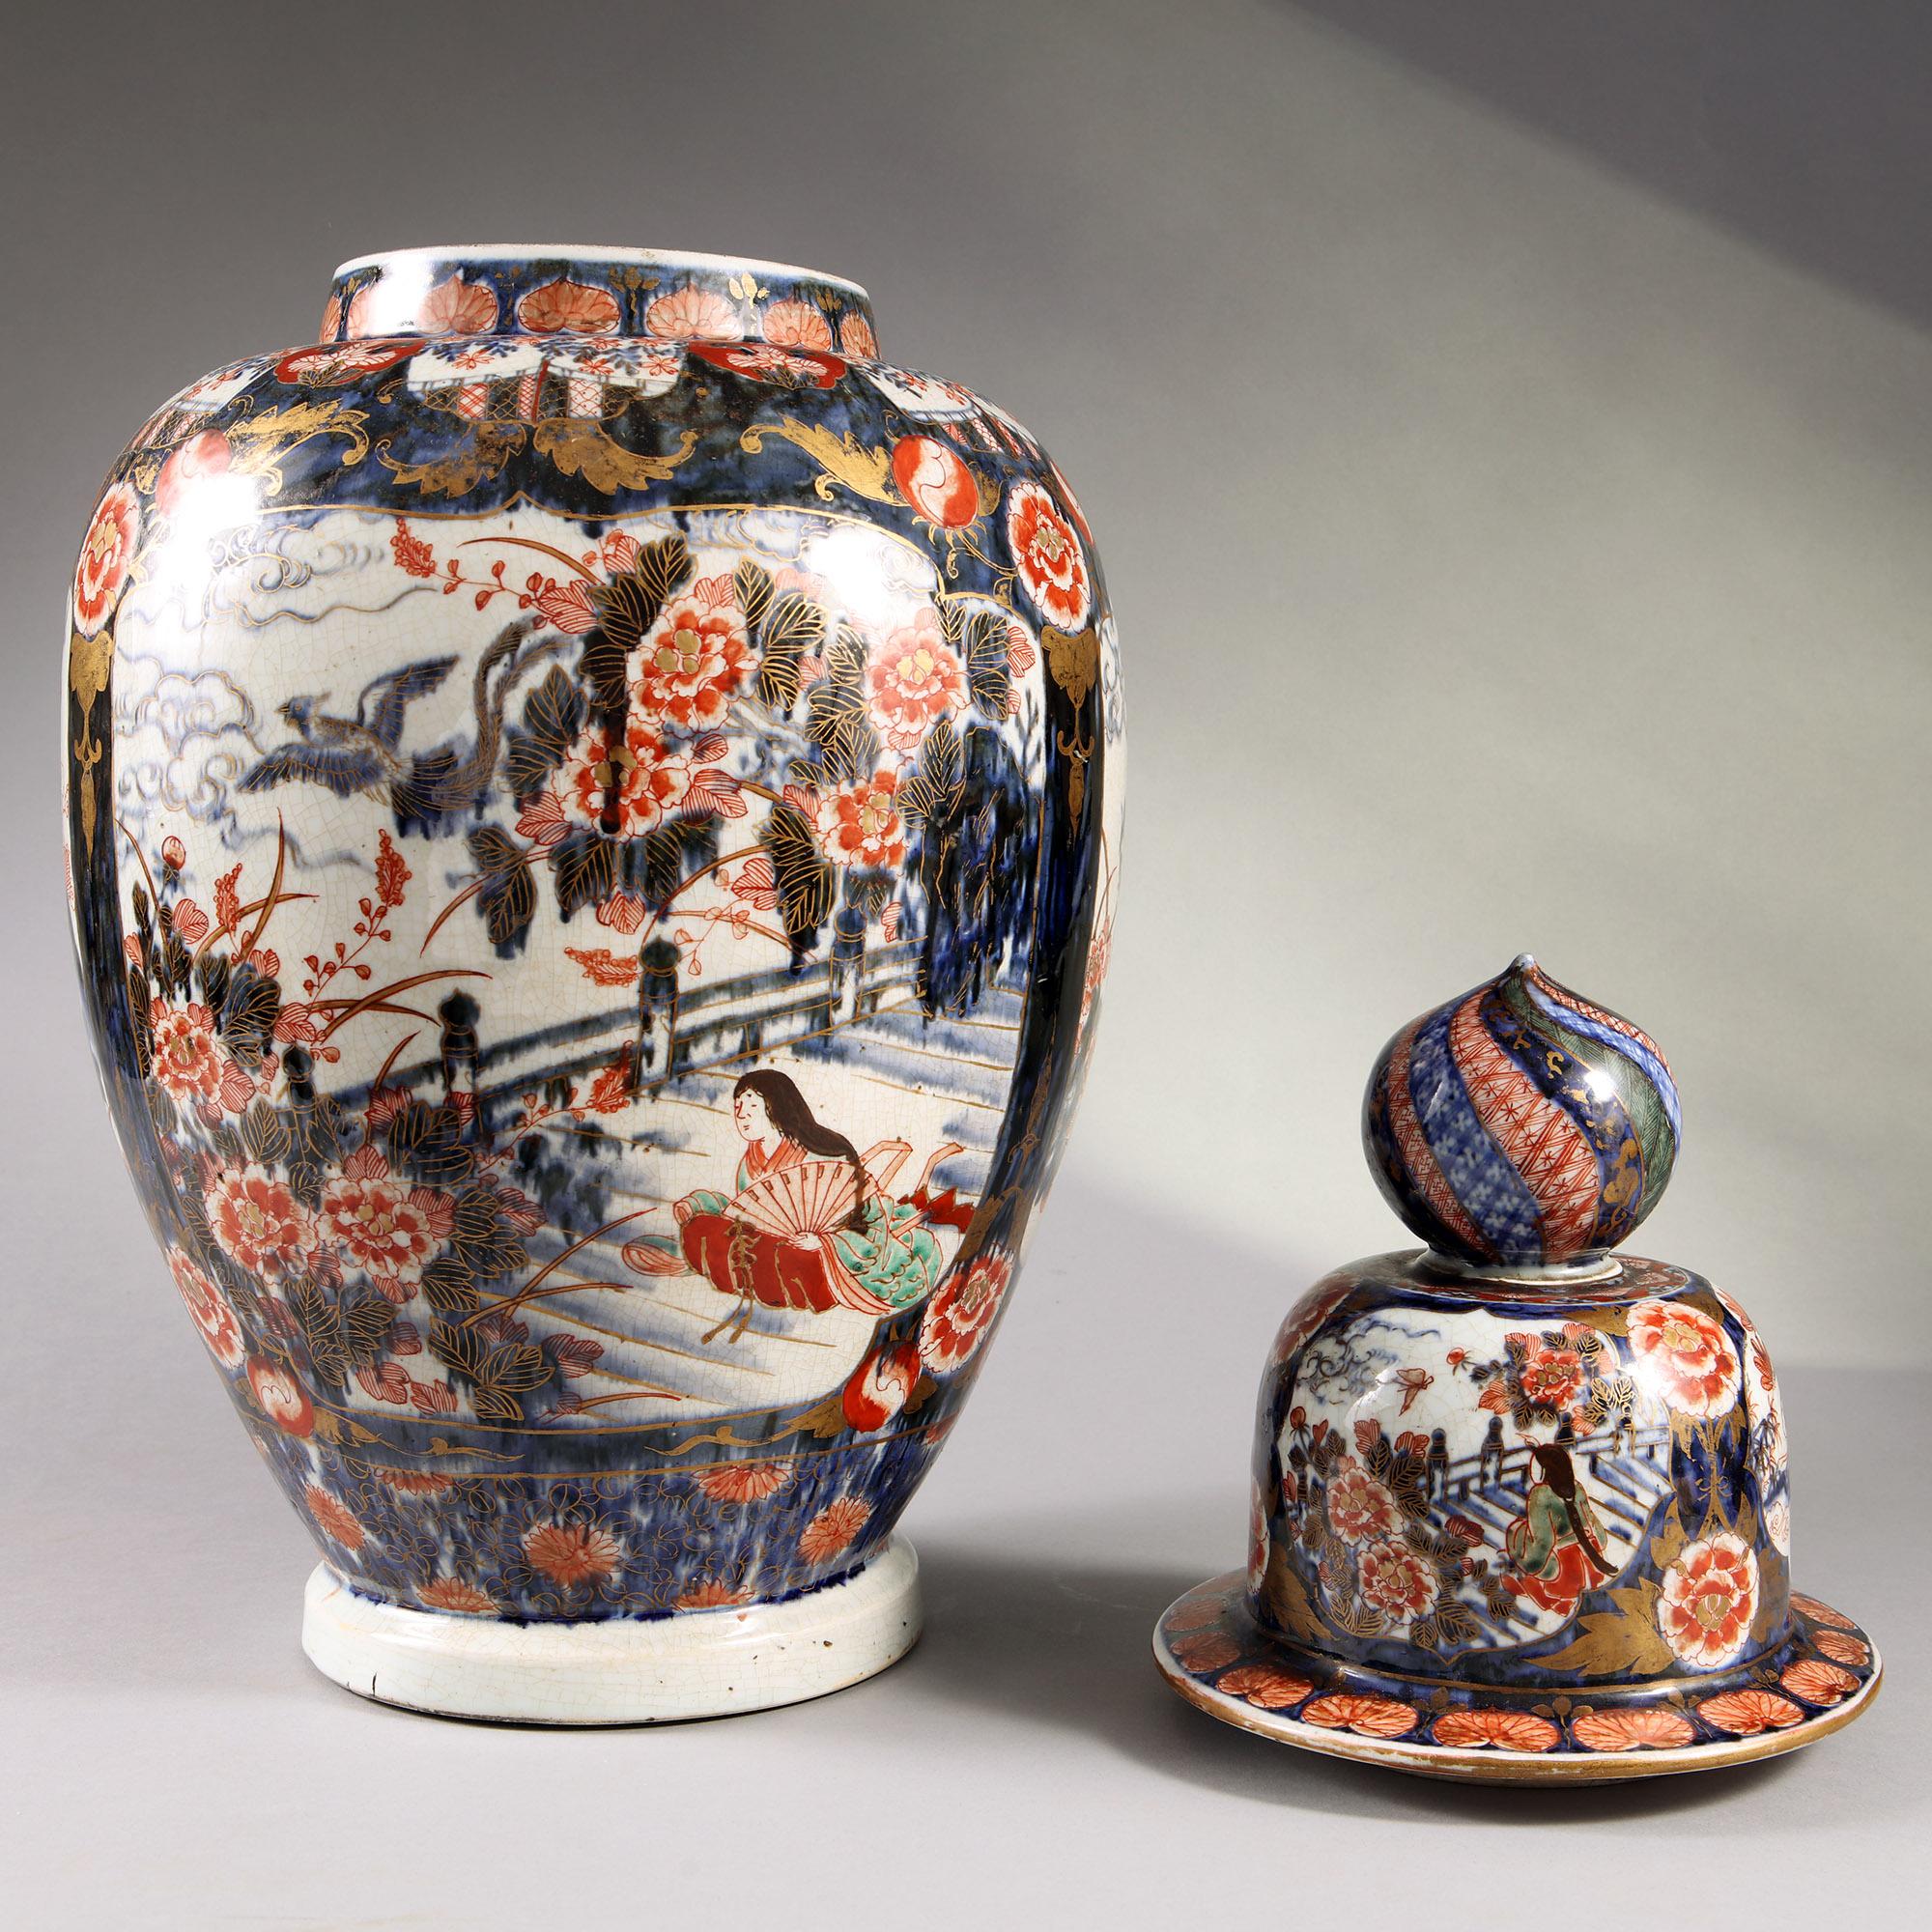 19th Century Japanese Imari Porcelain Vase and Cover  For Sale 2